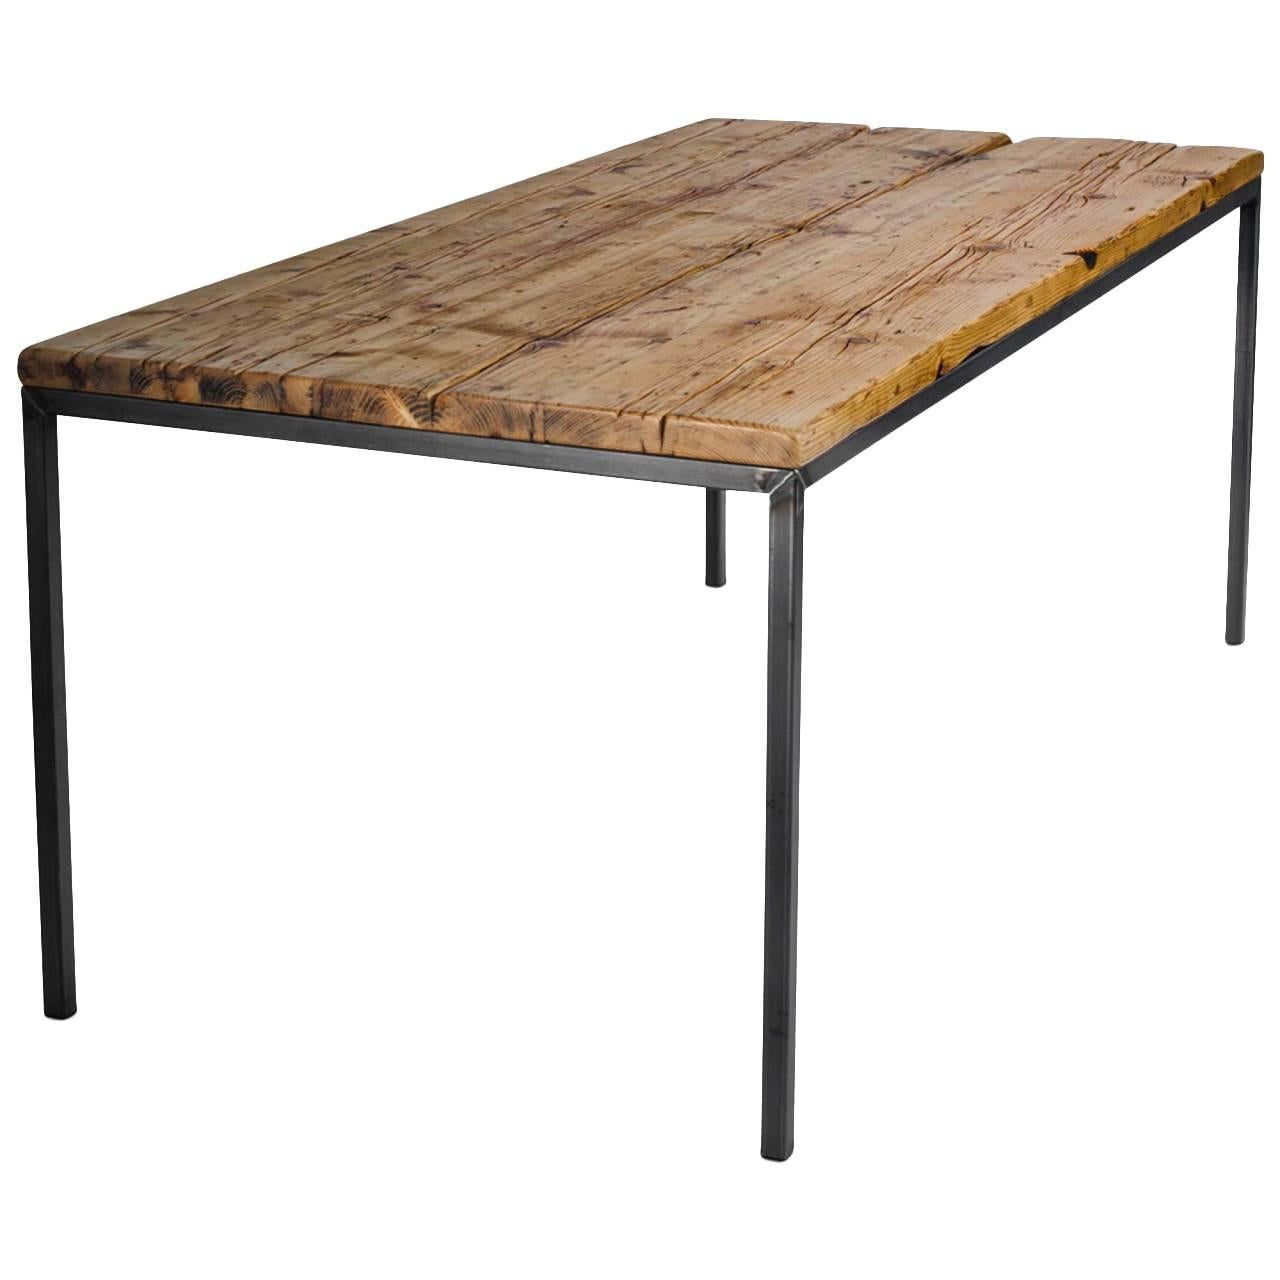 Dining Room Table "NO 01" by Manufacturer WUUD in Spruce Wood and Steel (220 cm) For Sale